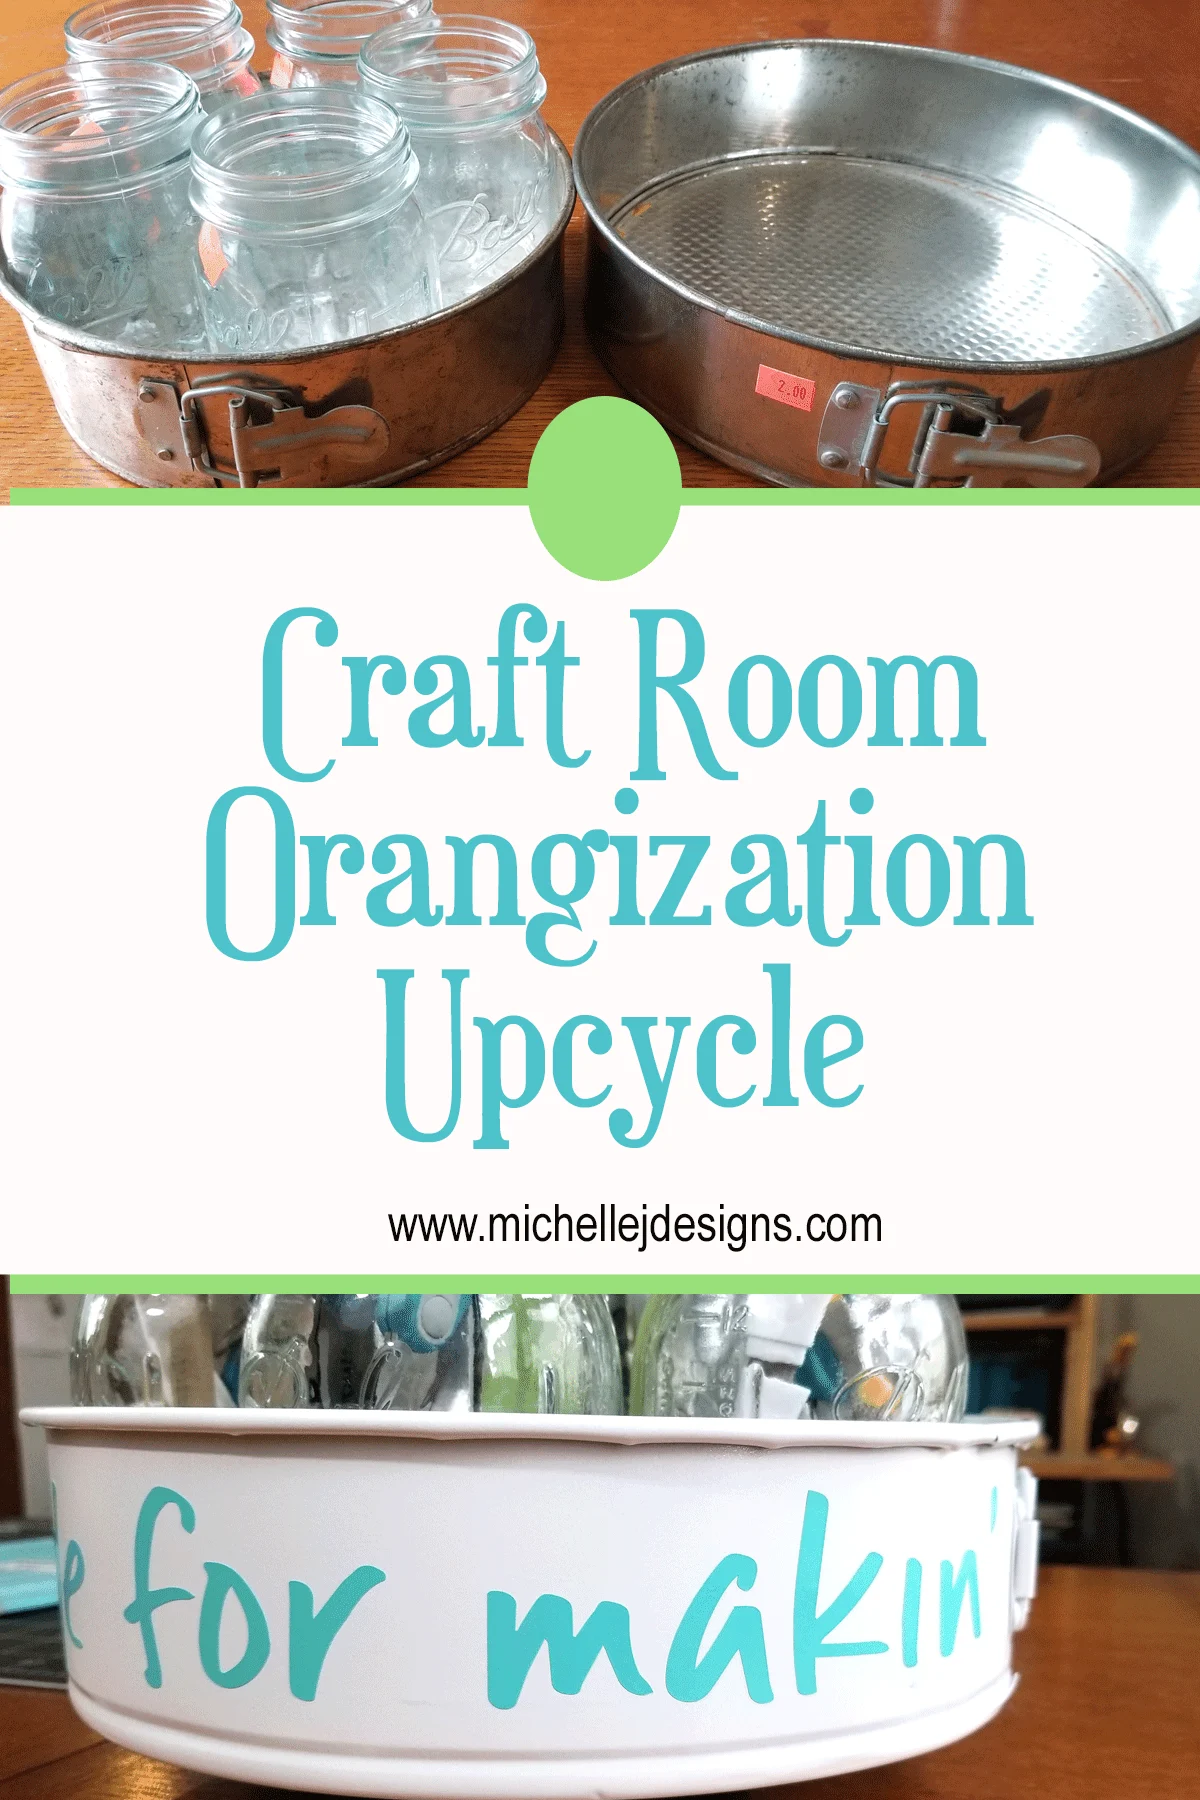 Before and after pics of a tiered craft tool organizer